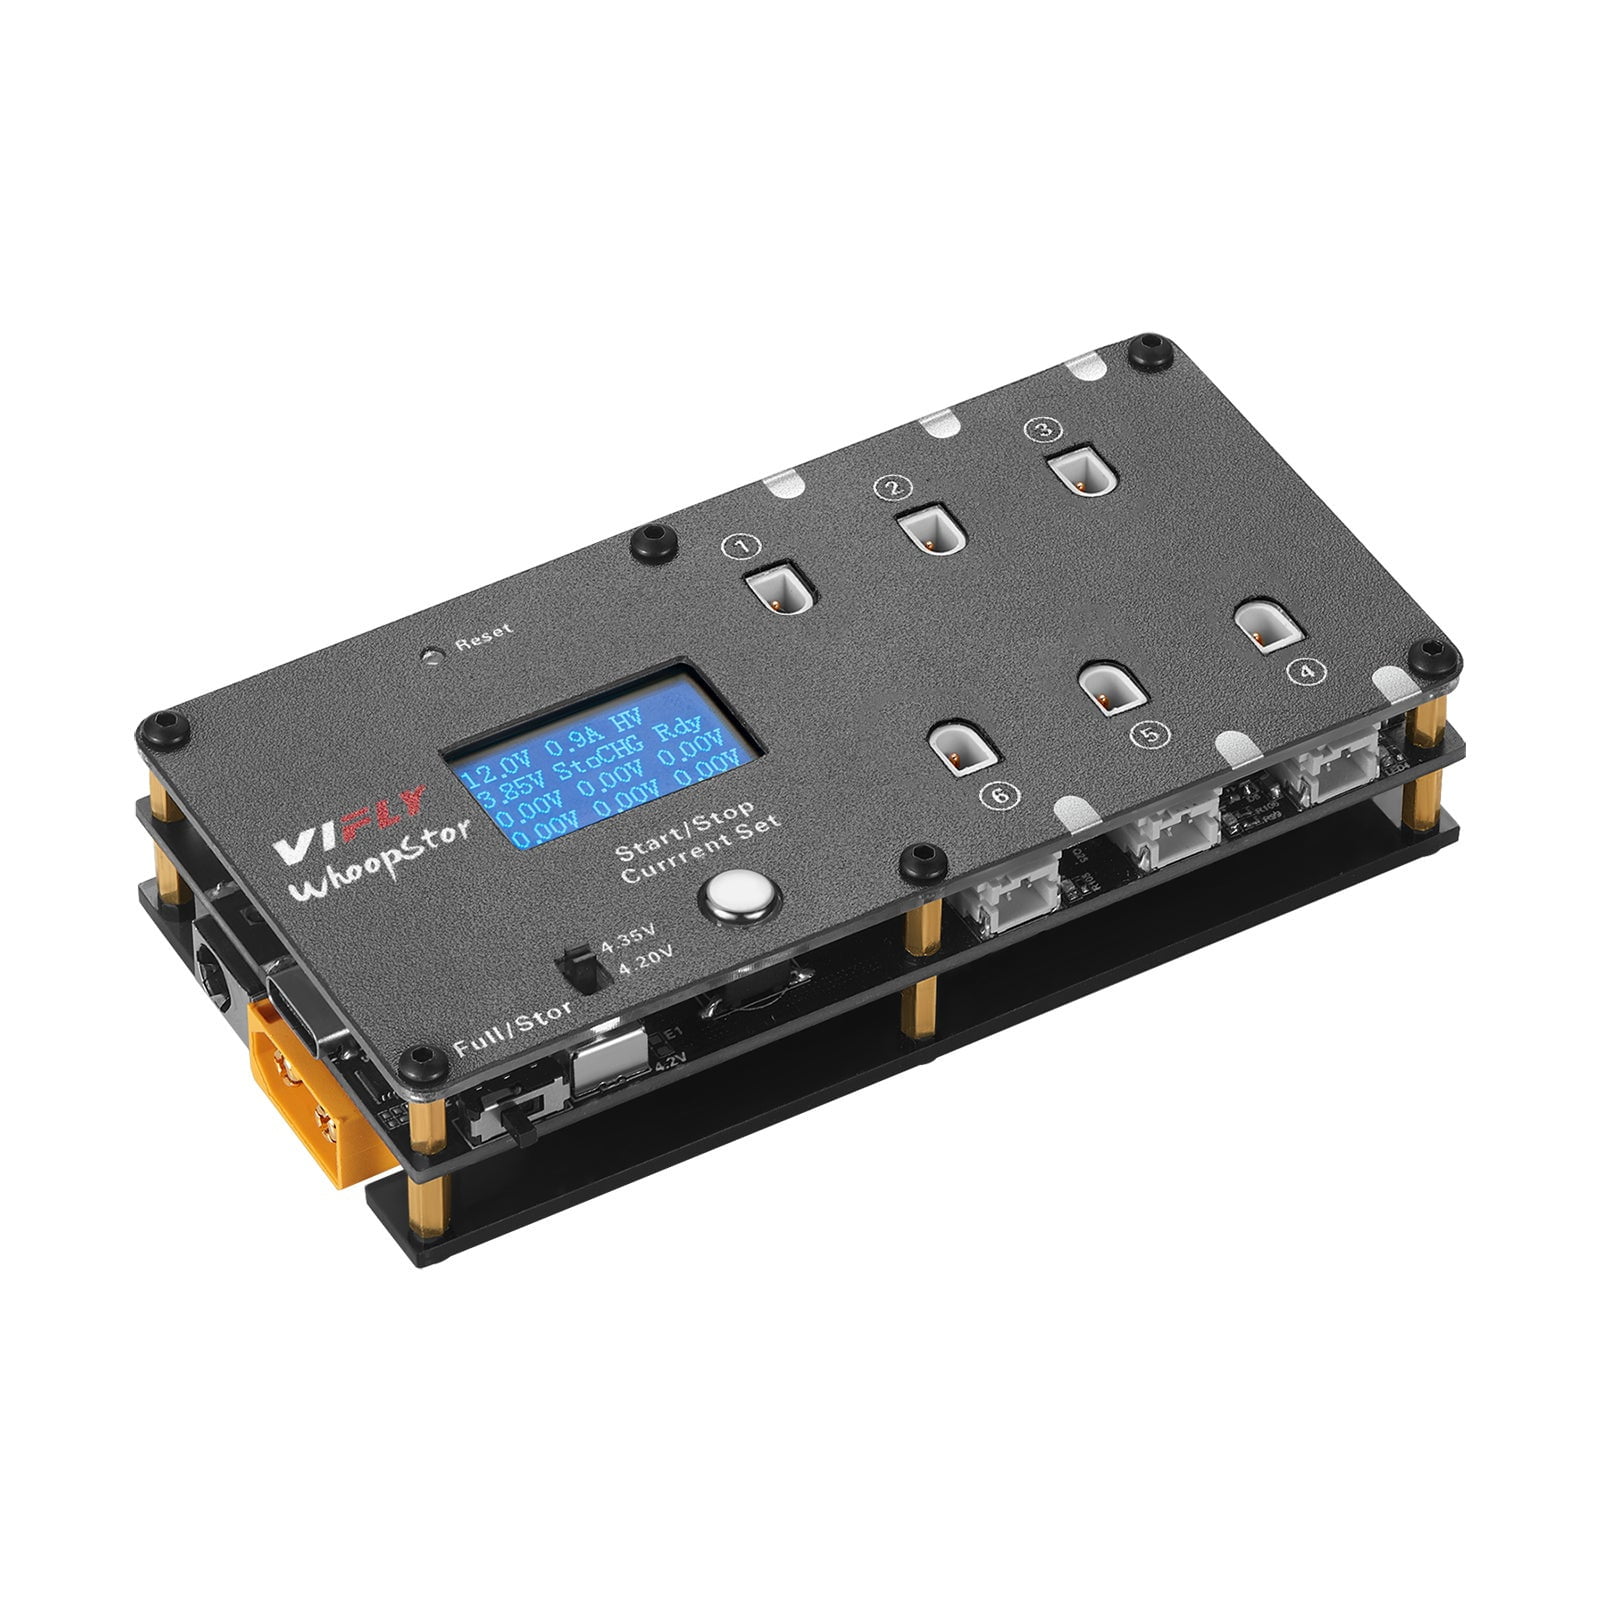 VIFLY Whoopstor V2 1S LiPo/LiHV Battery Charger / BT2.0-PH2.0